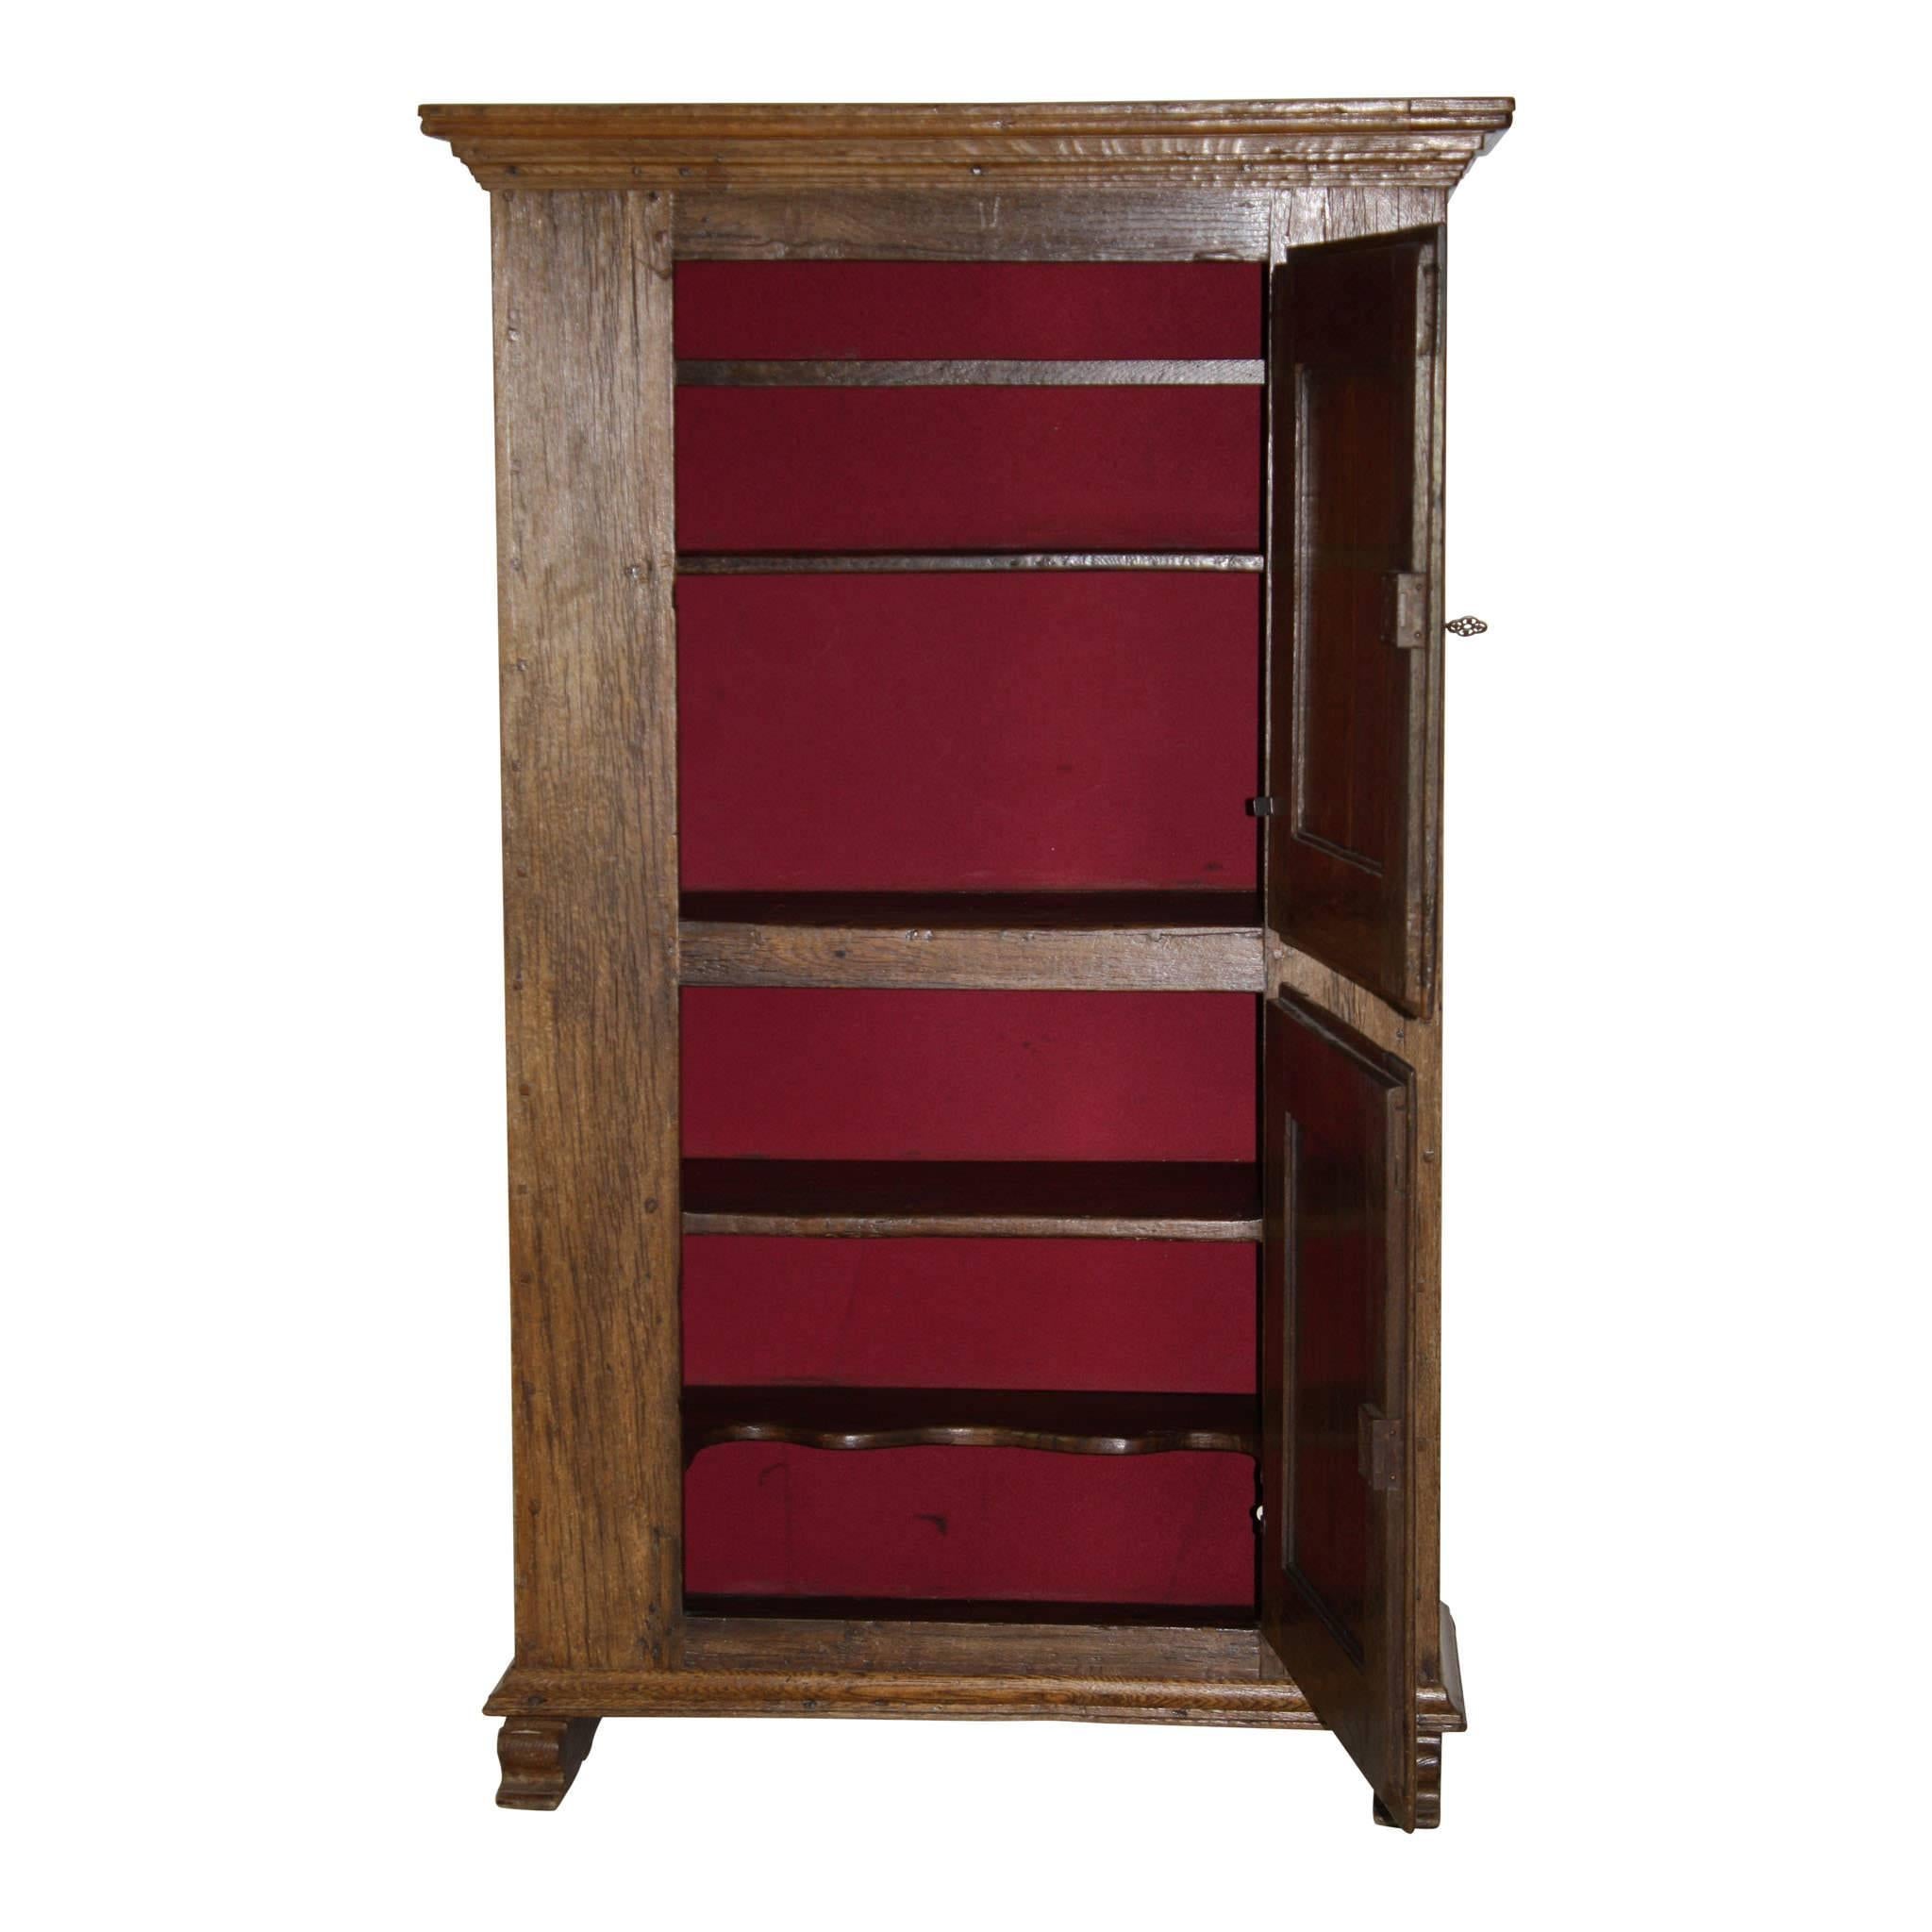 The solid construction of this red oak cabinet makes it a weighty piece. It has five shelves behind two doors, the lower shelf has three recesses. The doors have carvings of small shells at each corner. Its back interior has been covered in red